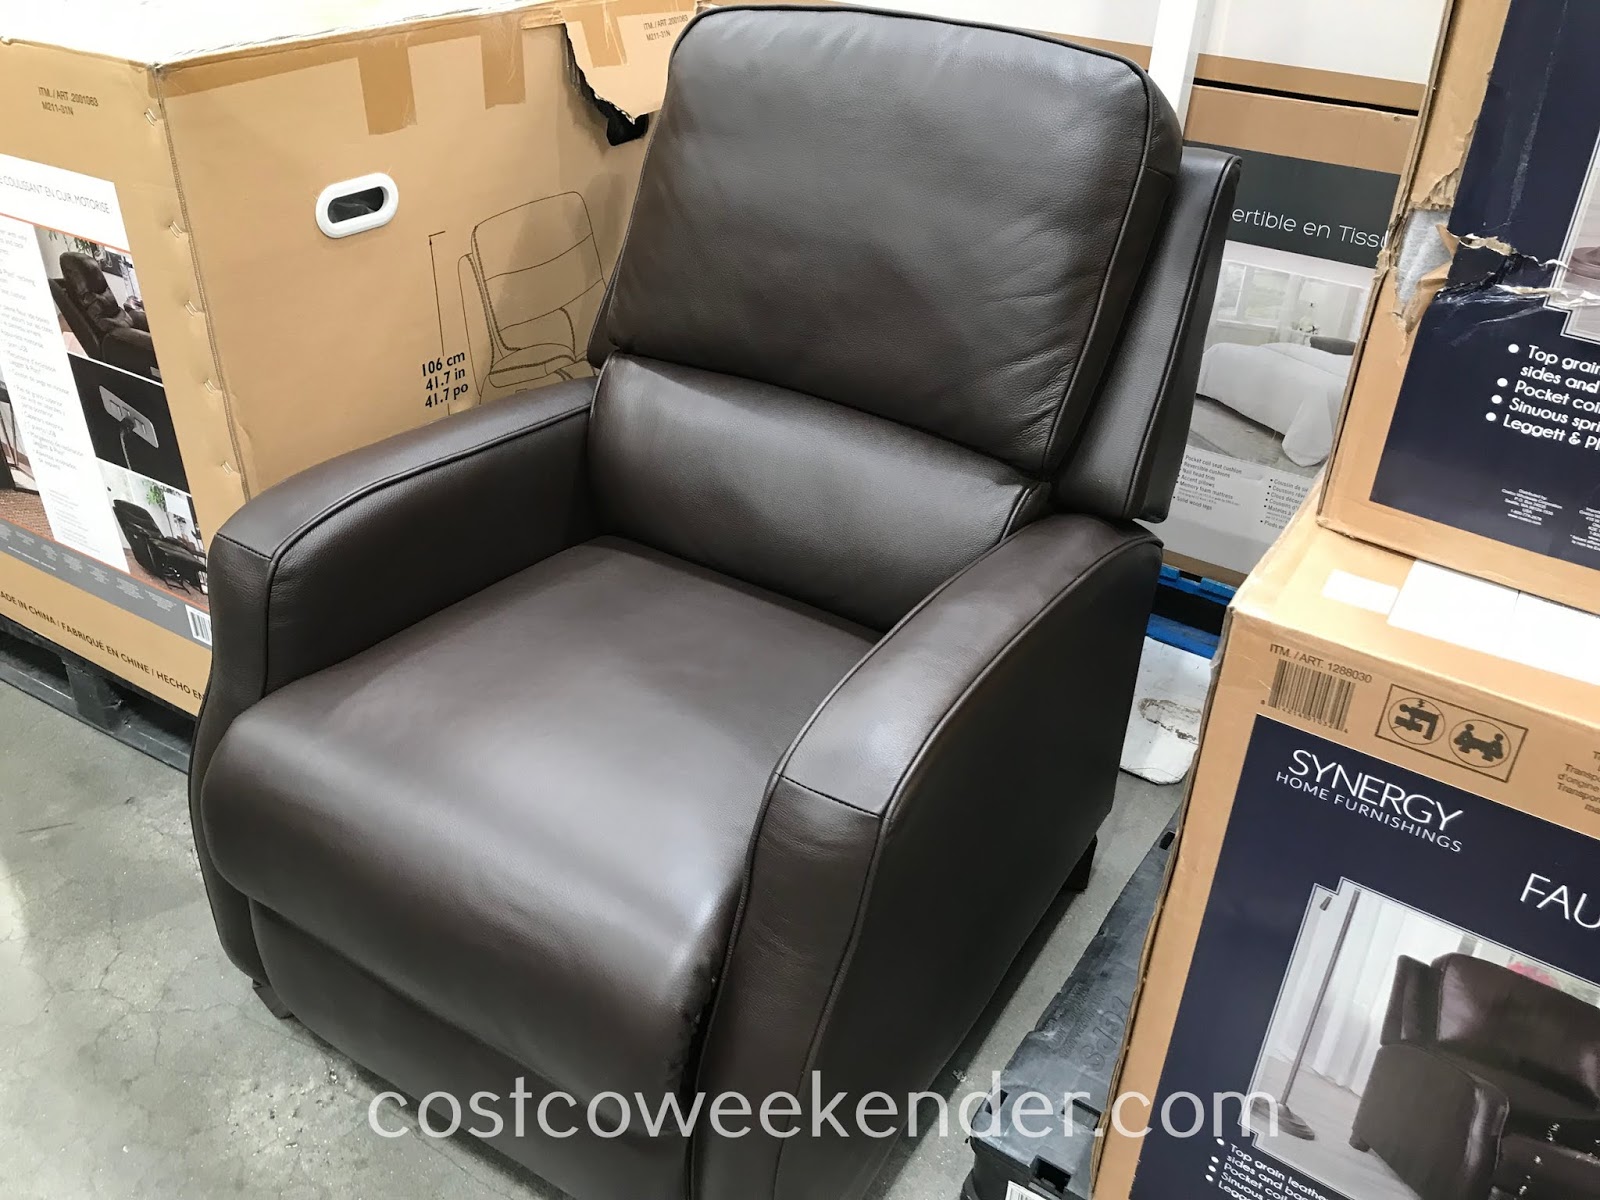 Synergy Kyleigh Leather Pushback Recliner Costco Weekender